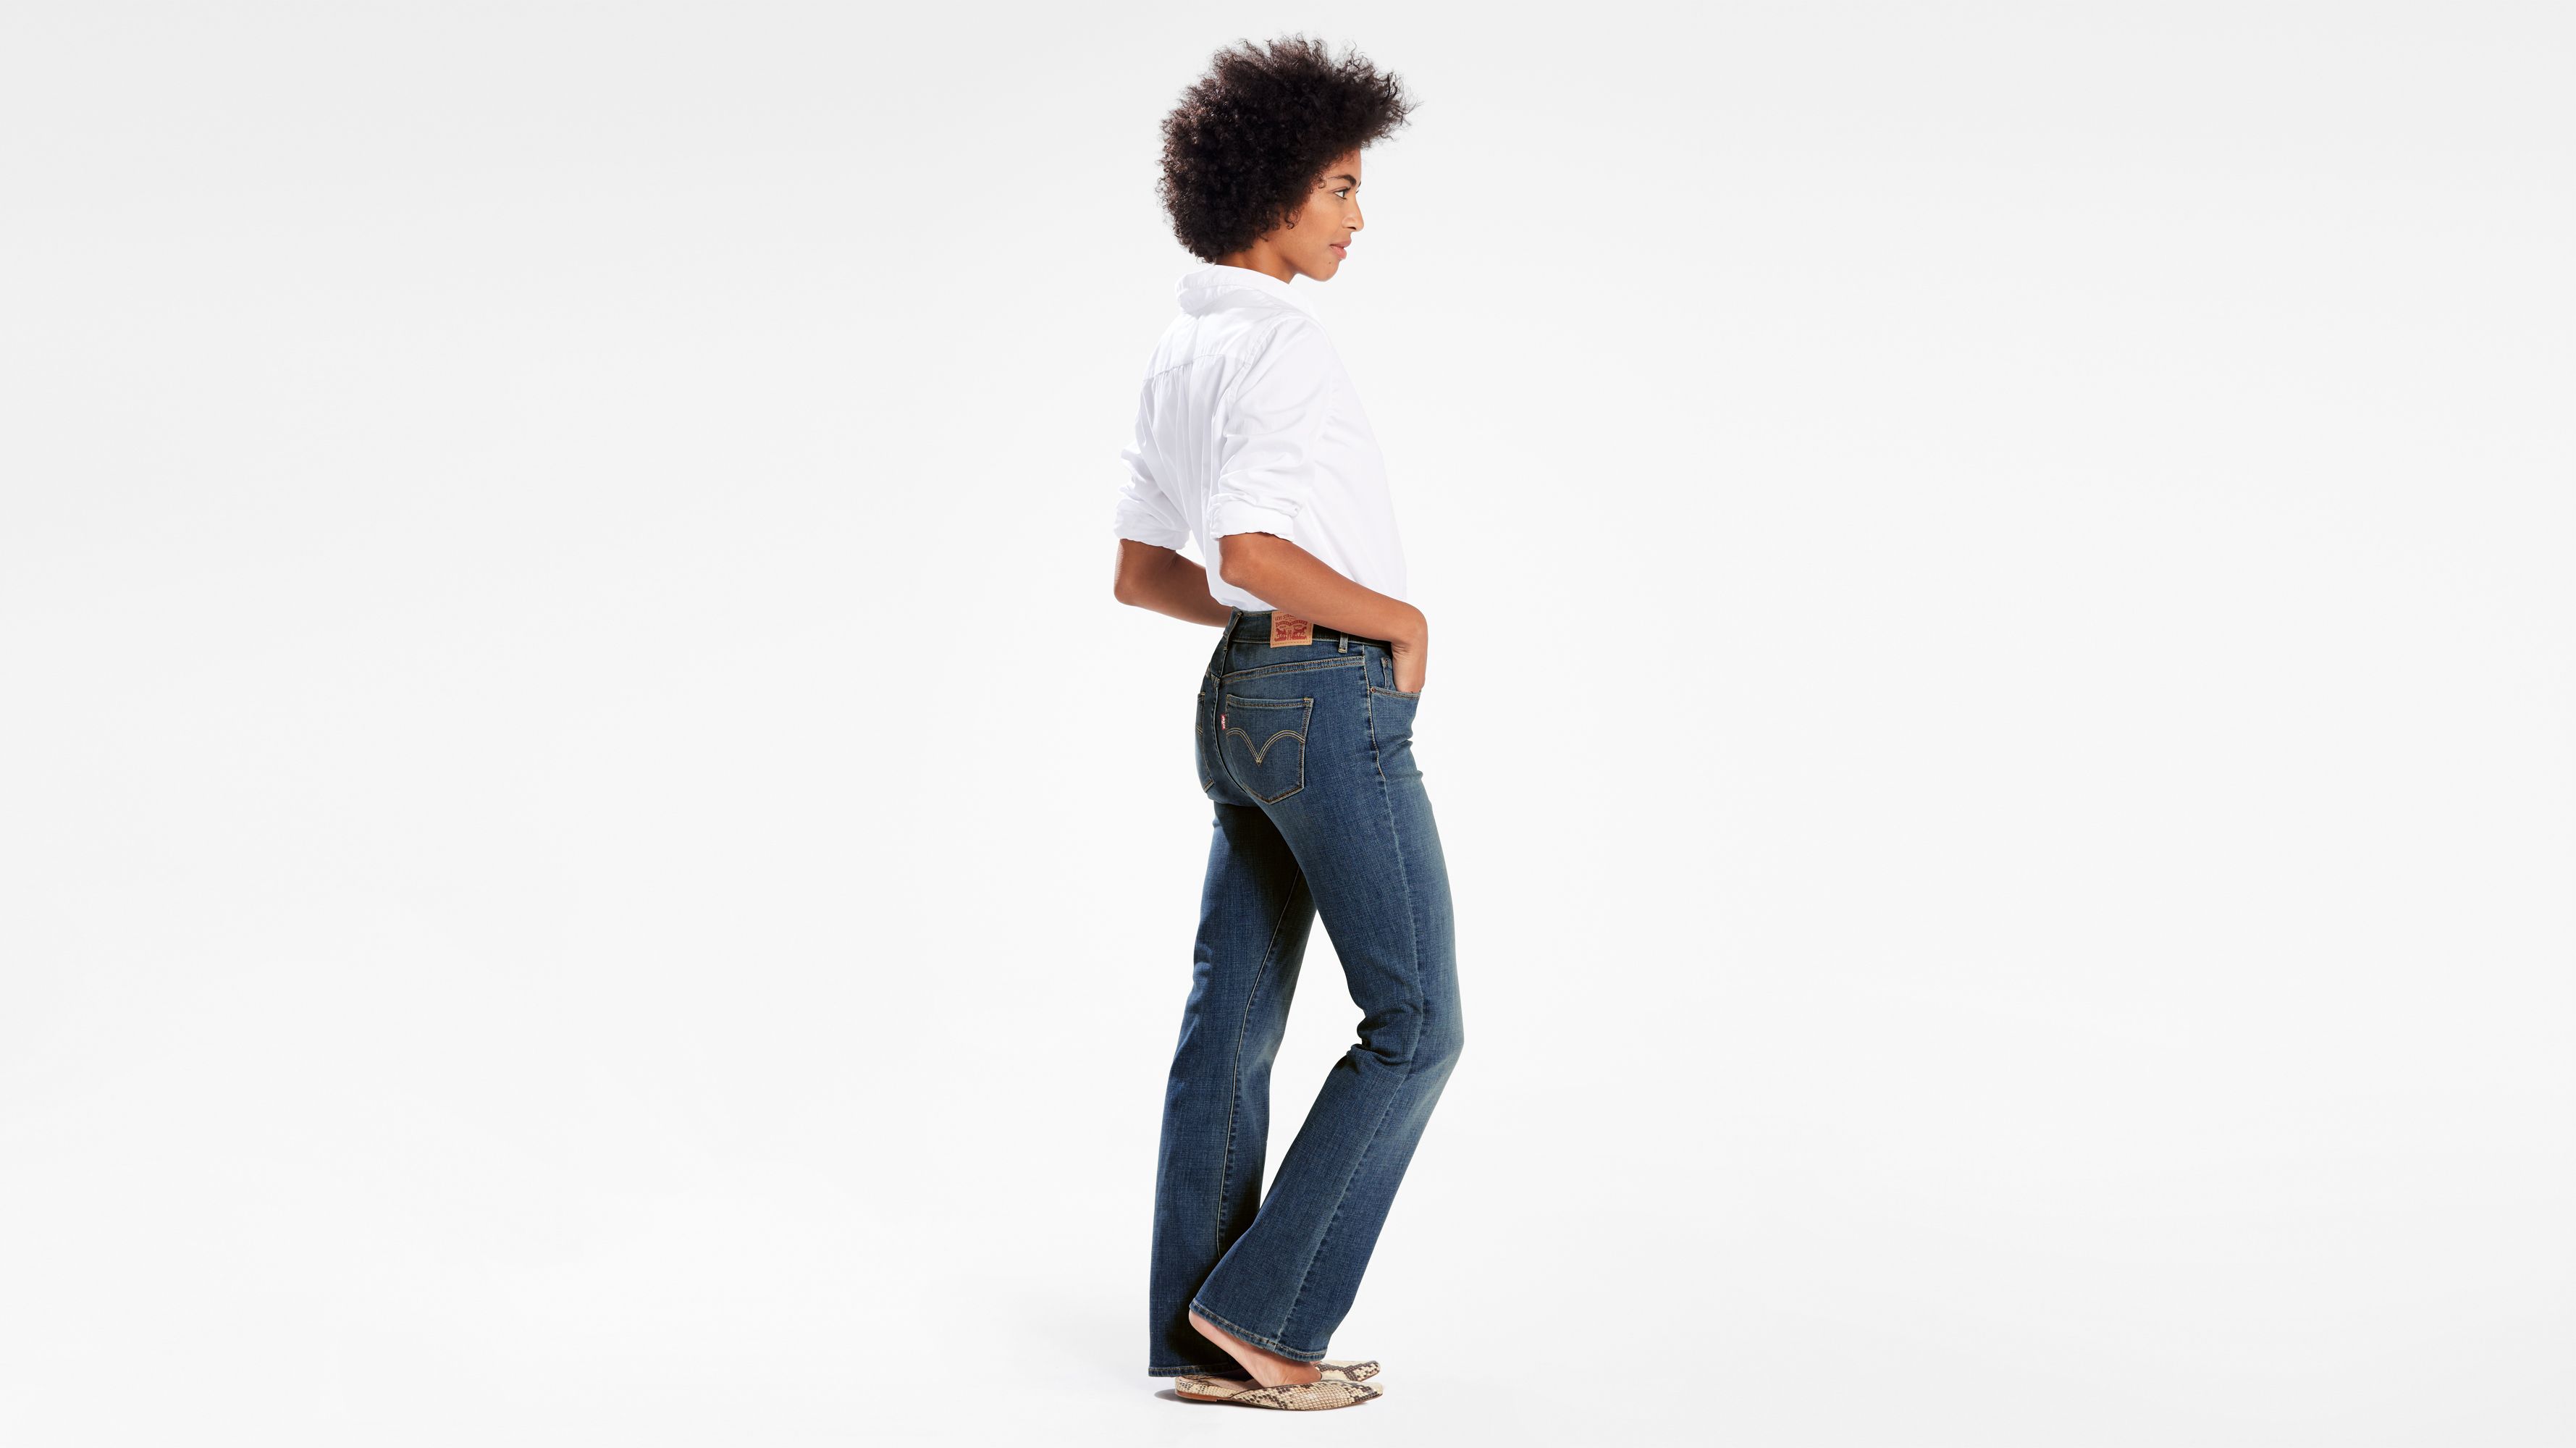 Buy > levi's classic bootcut women's jeans > in stock